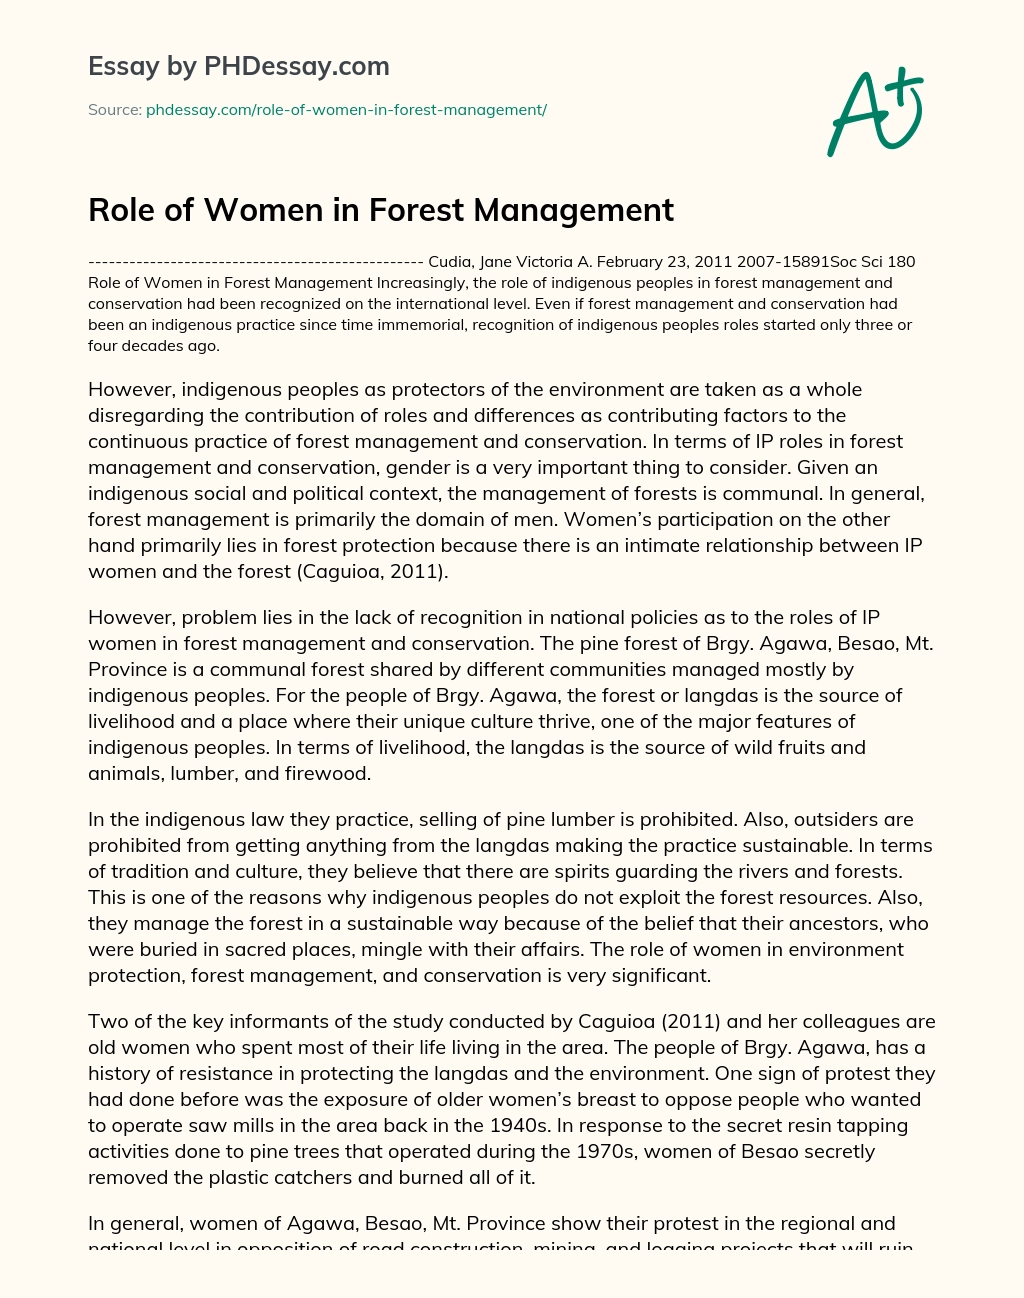 Role of Women in Forest Management essay